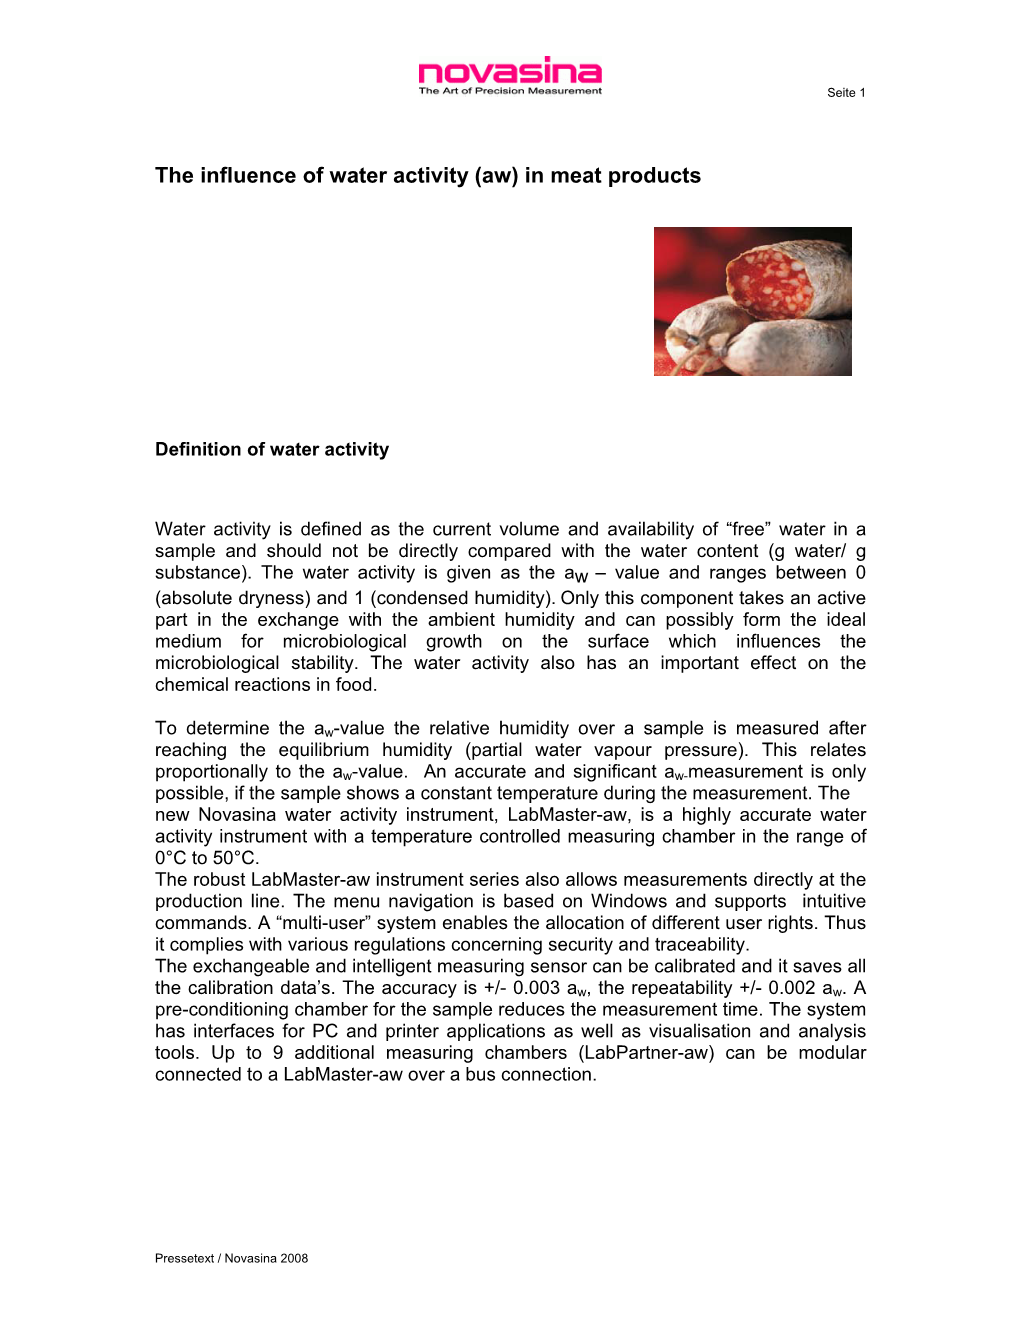 The Influence of Water Activity (Aw) in Meat Products